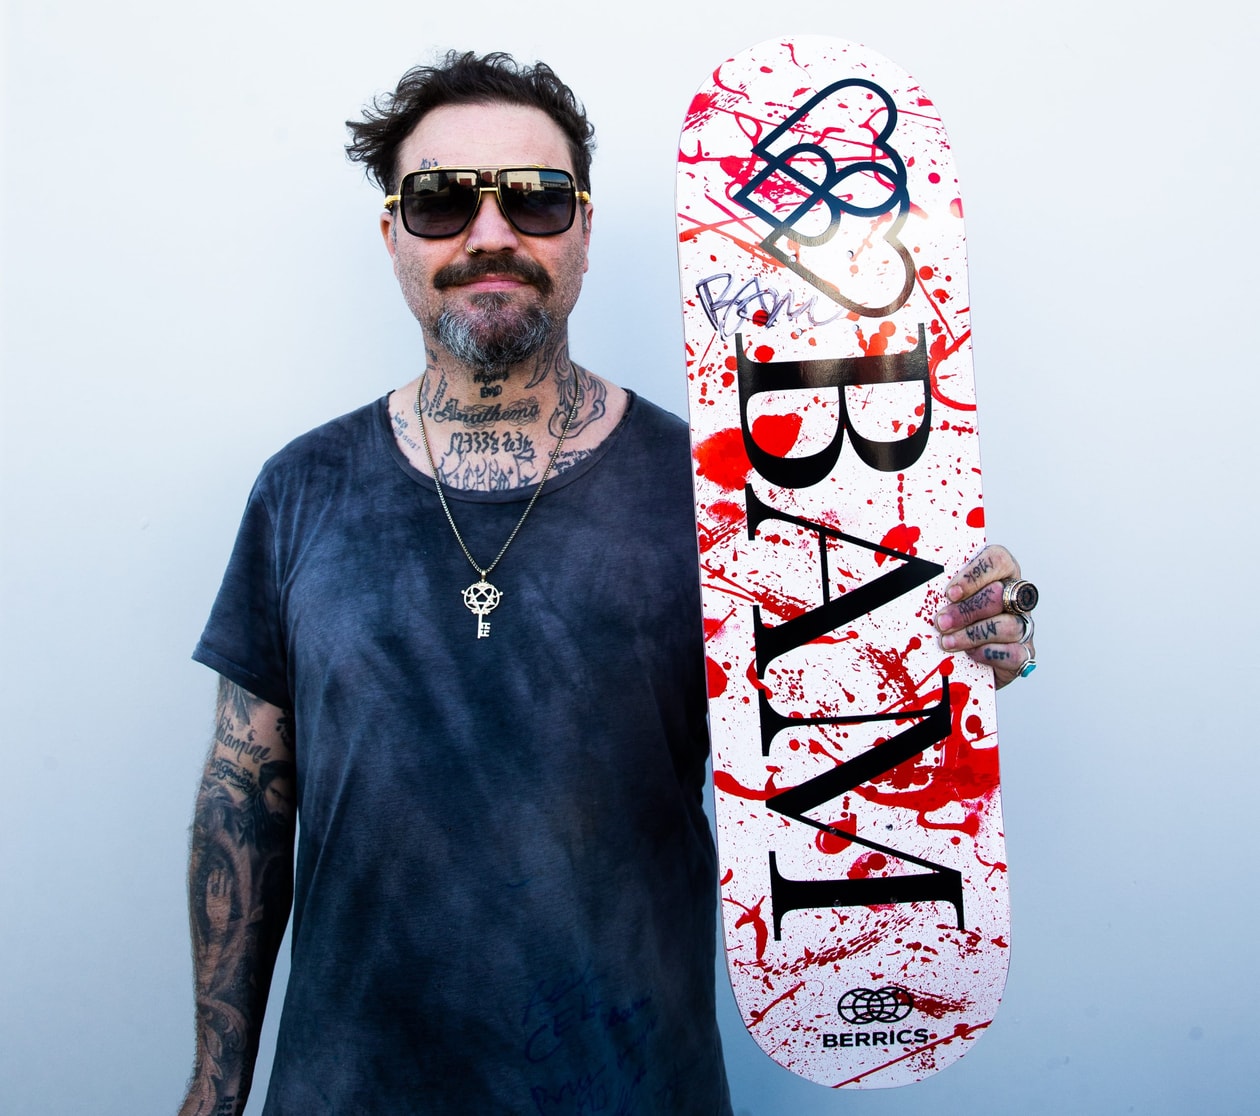 Bam Margera Achieves 30 Days Of Sobriety And Returns To Skateboarding